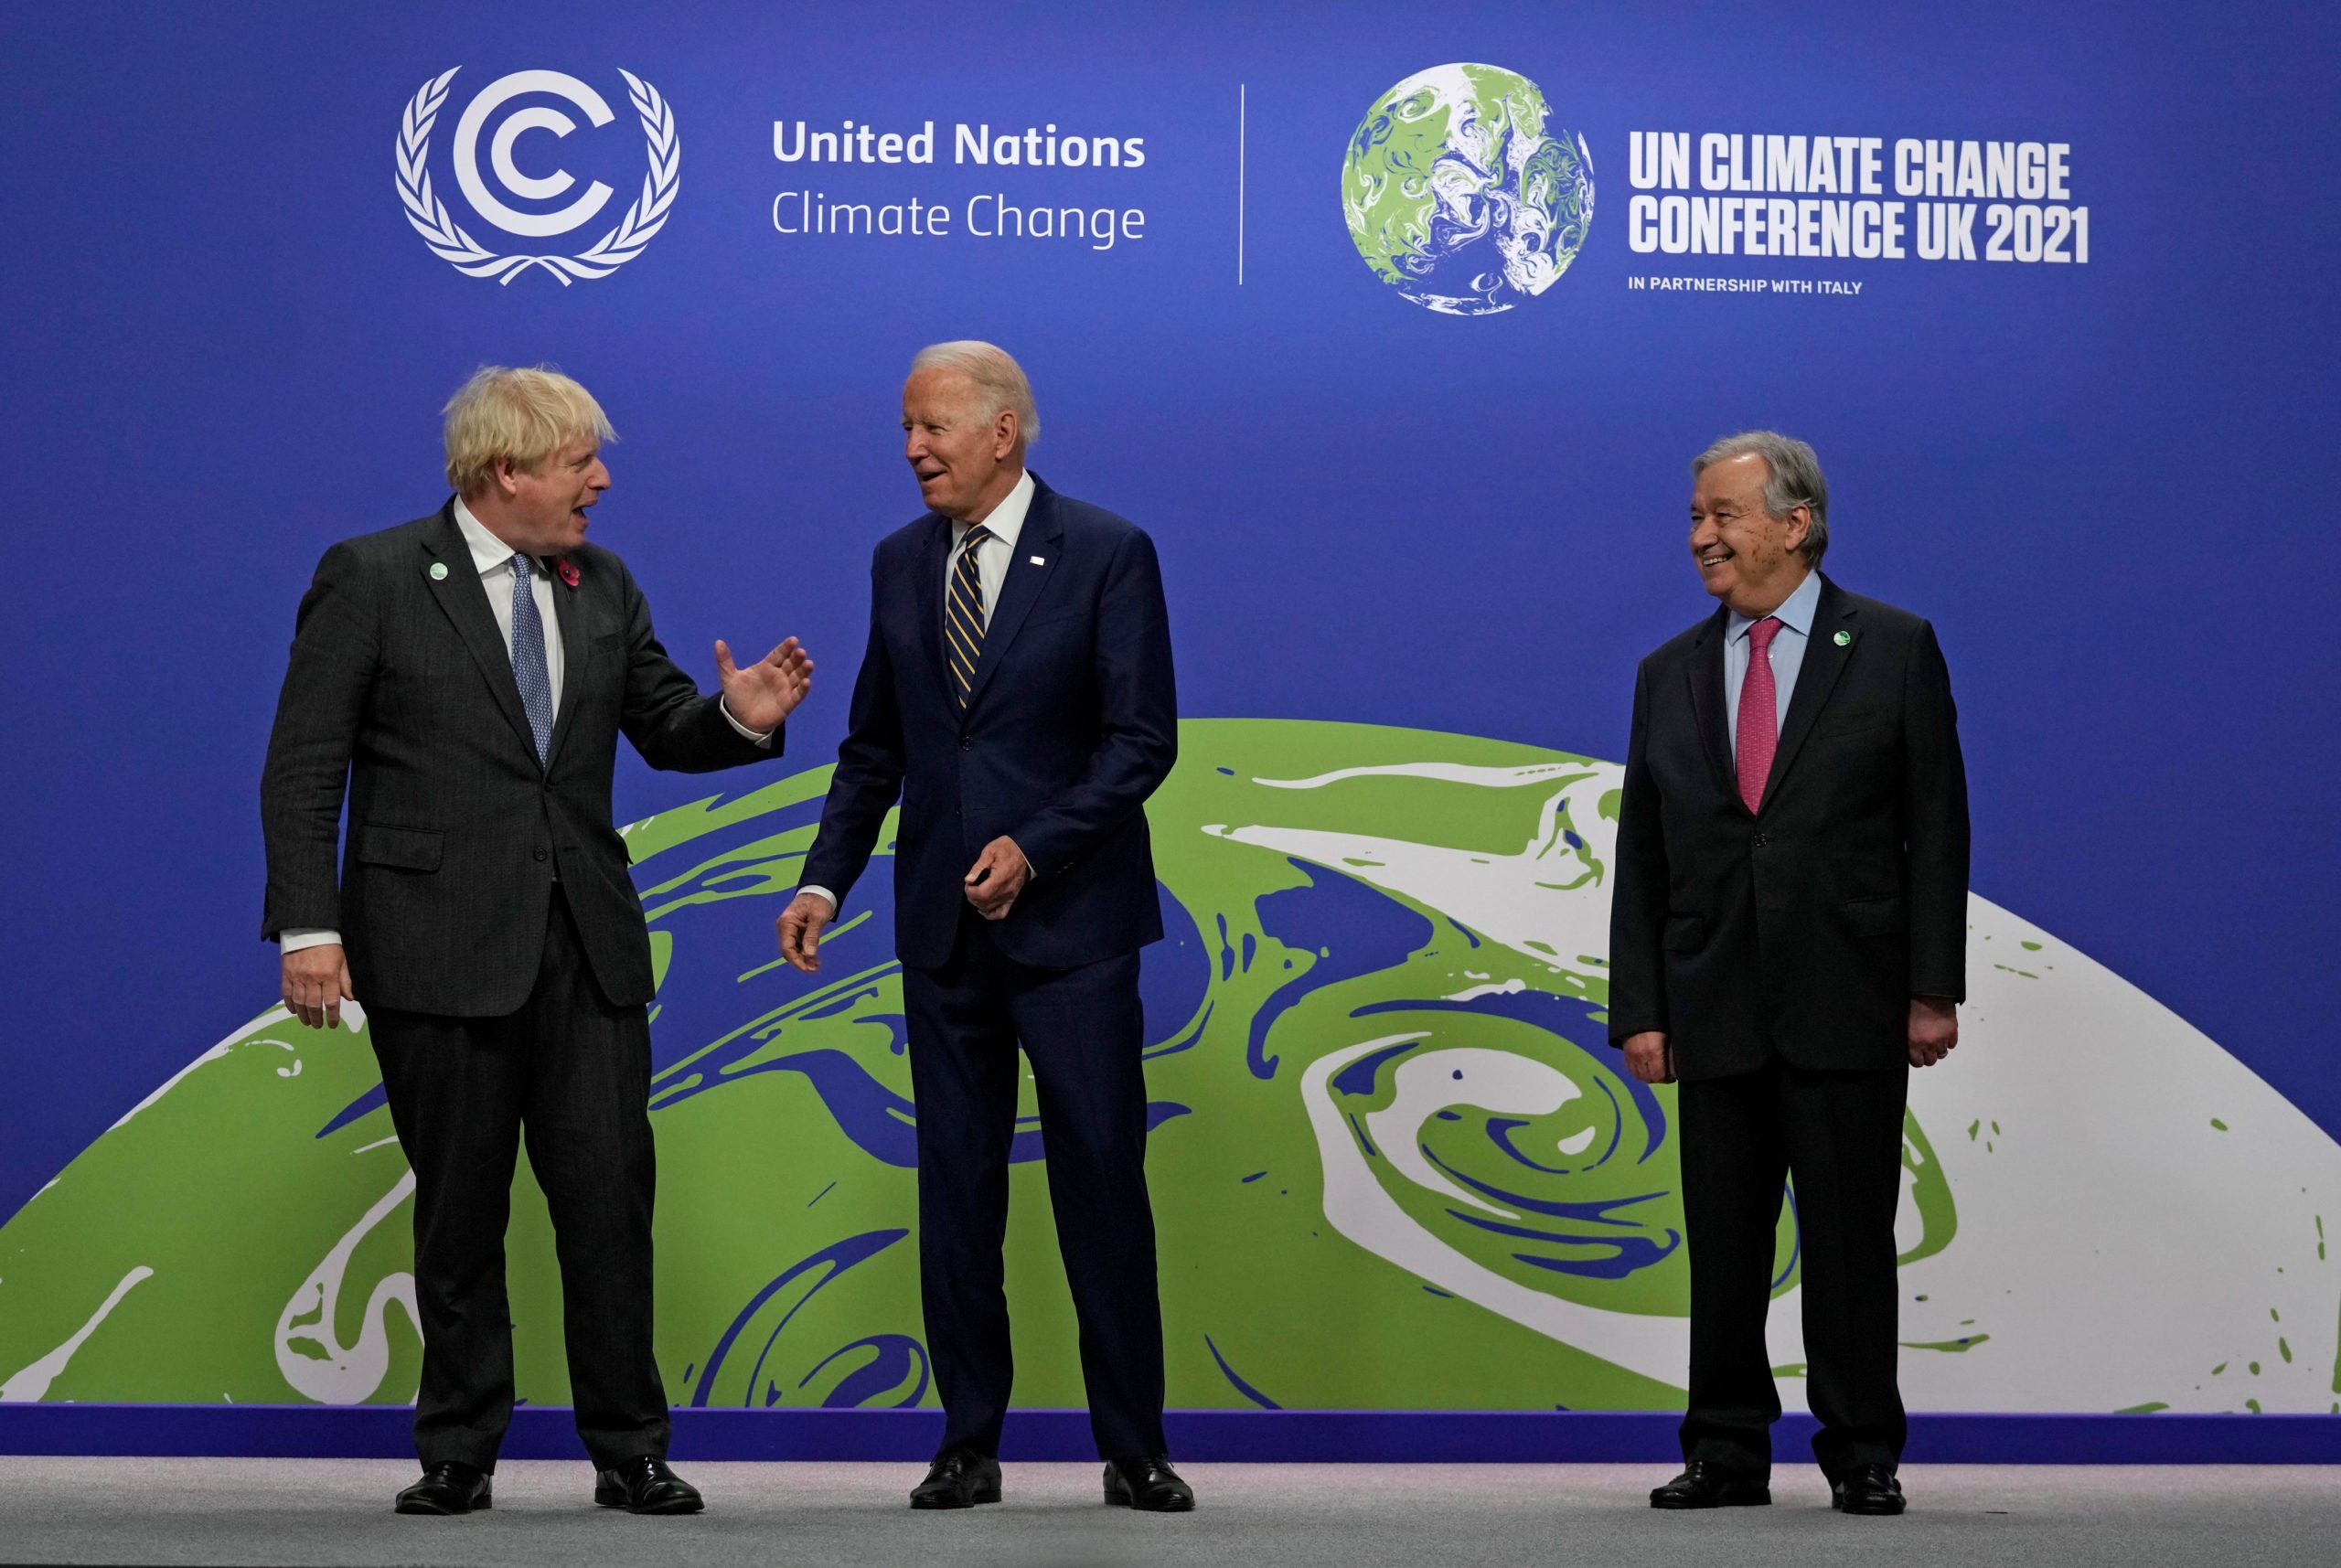 GLASGOW, SCOTLAND - NOVEMBER 01: British Prime Minister Boris Johnson (L) and UN Secretary-General Antonio Guterres (R) greet U.S. President Joe Biden as he arrives for day two of COP26 at SECC on November 1, 2021 in Glasgow, Scotland. 2021 sees the 26th United Nations Climate Change Conference. The conference will run from 31 October for two weeks, finishing on 12 November. It was meant to take place in 2020 but was delayed due to the Covid-19 pandemic. (Photo by Alastair Grant - Pool/Getty Images)